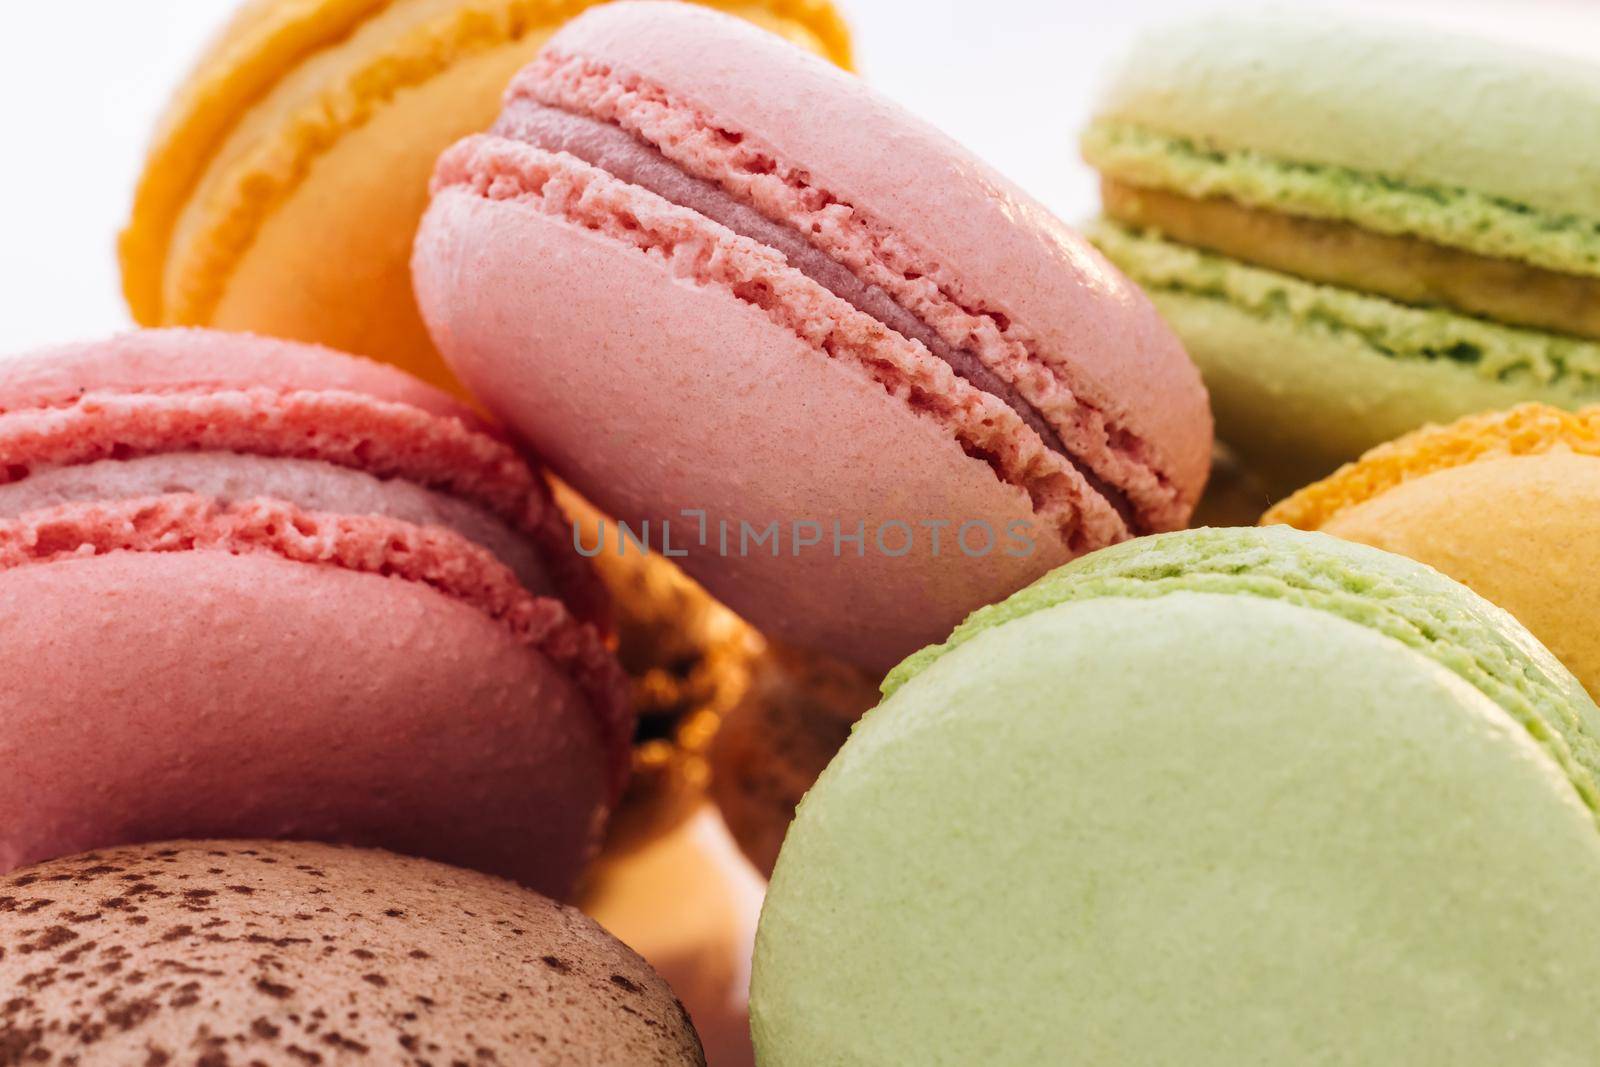 Macarons dessert. Close up of multicolor macarons French macaroon greedy pastry on white background. Food concept.